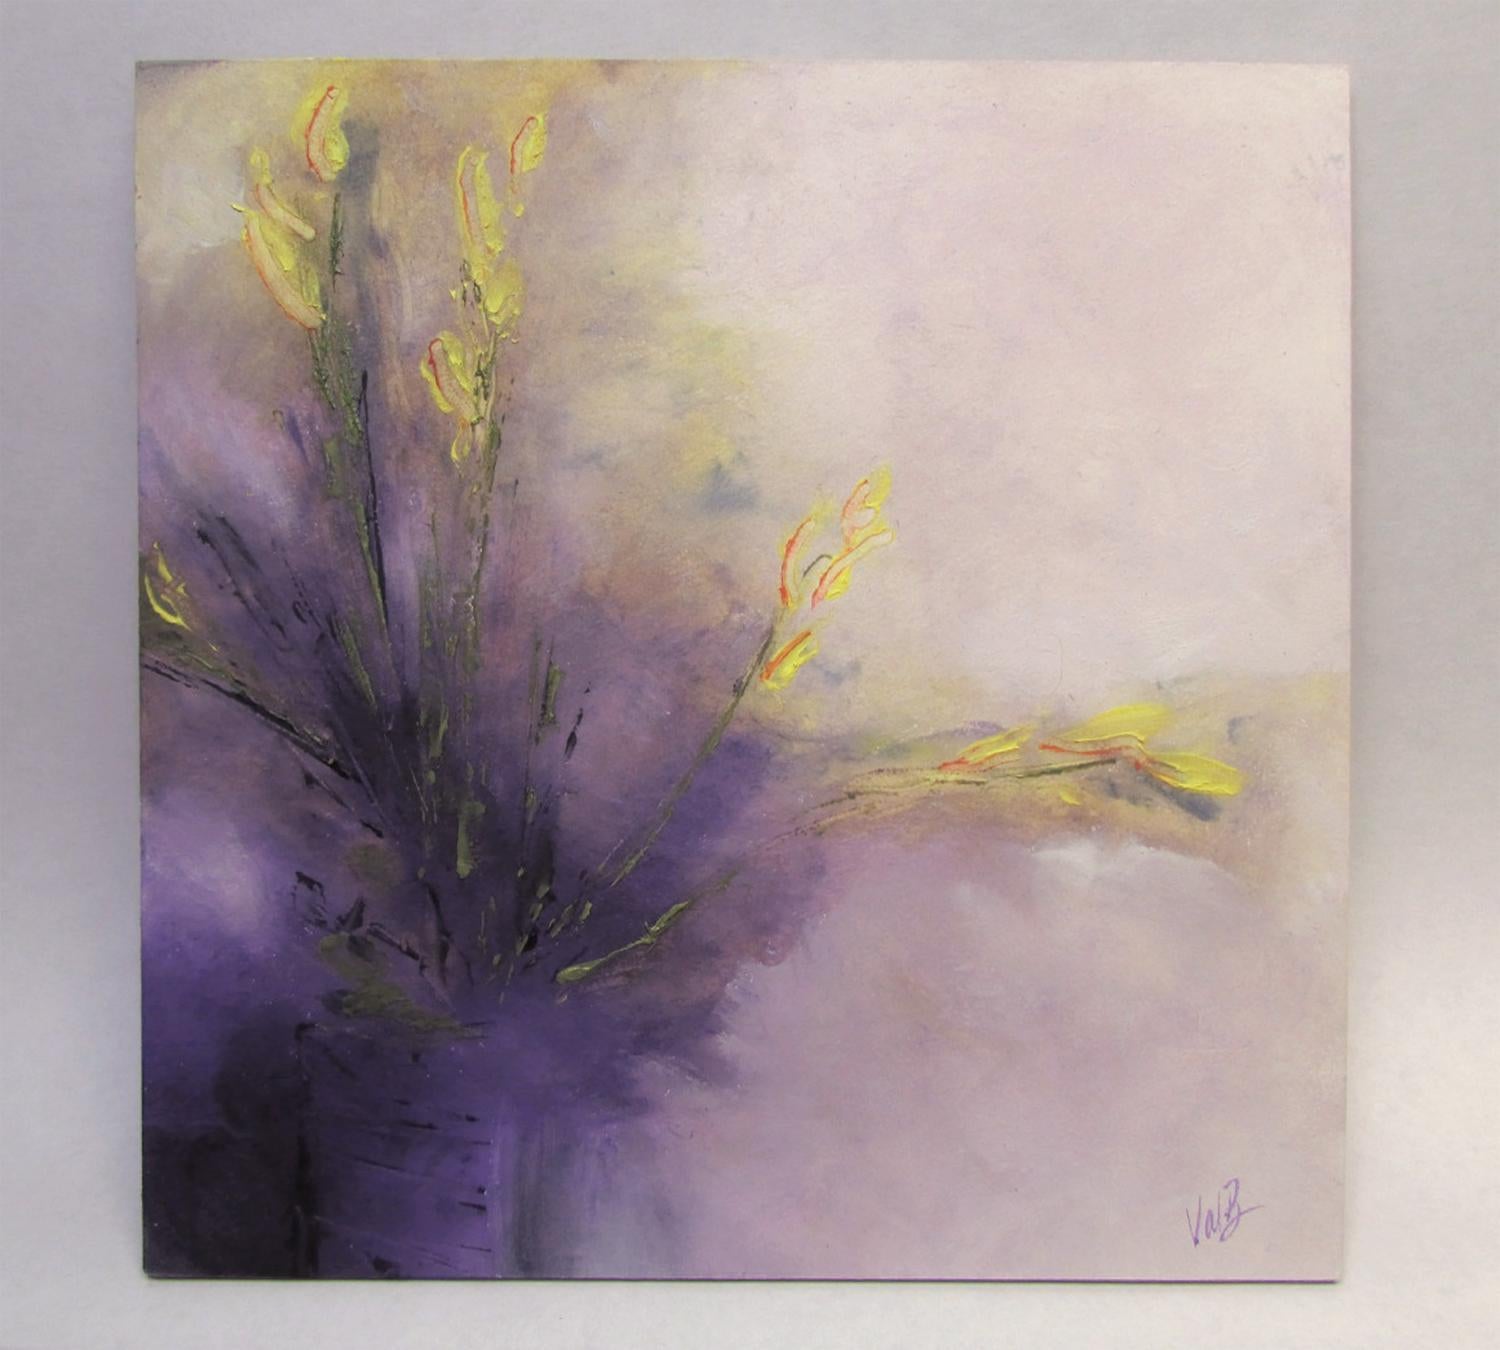 <p>Artist Comments<br>Using a limited palette of transparent purples and yellows, artist Valerie Berkely presents a calming abstract floral. 